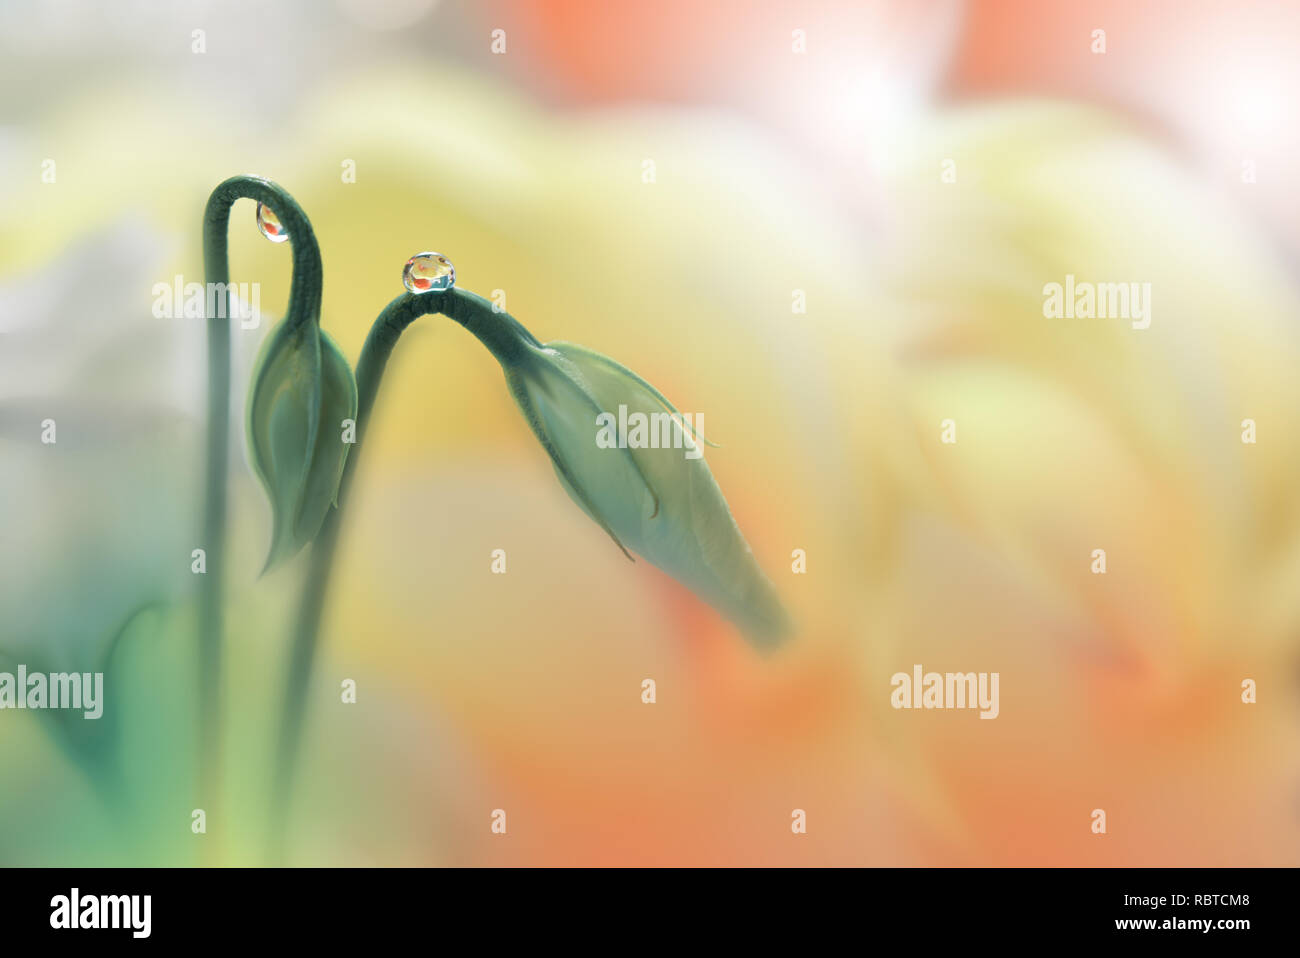 Spring nature blossom web banner or header.Abstract macro.Conceptual Artistic Background.Fantasy design.Colorful Wallpaper.Valentine day.Love.Couple. Stock Photo